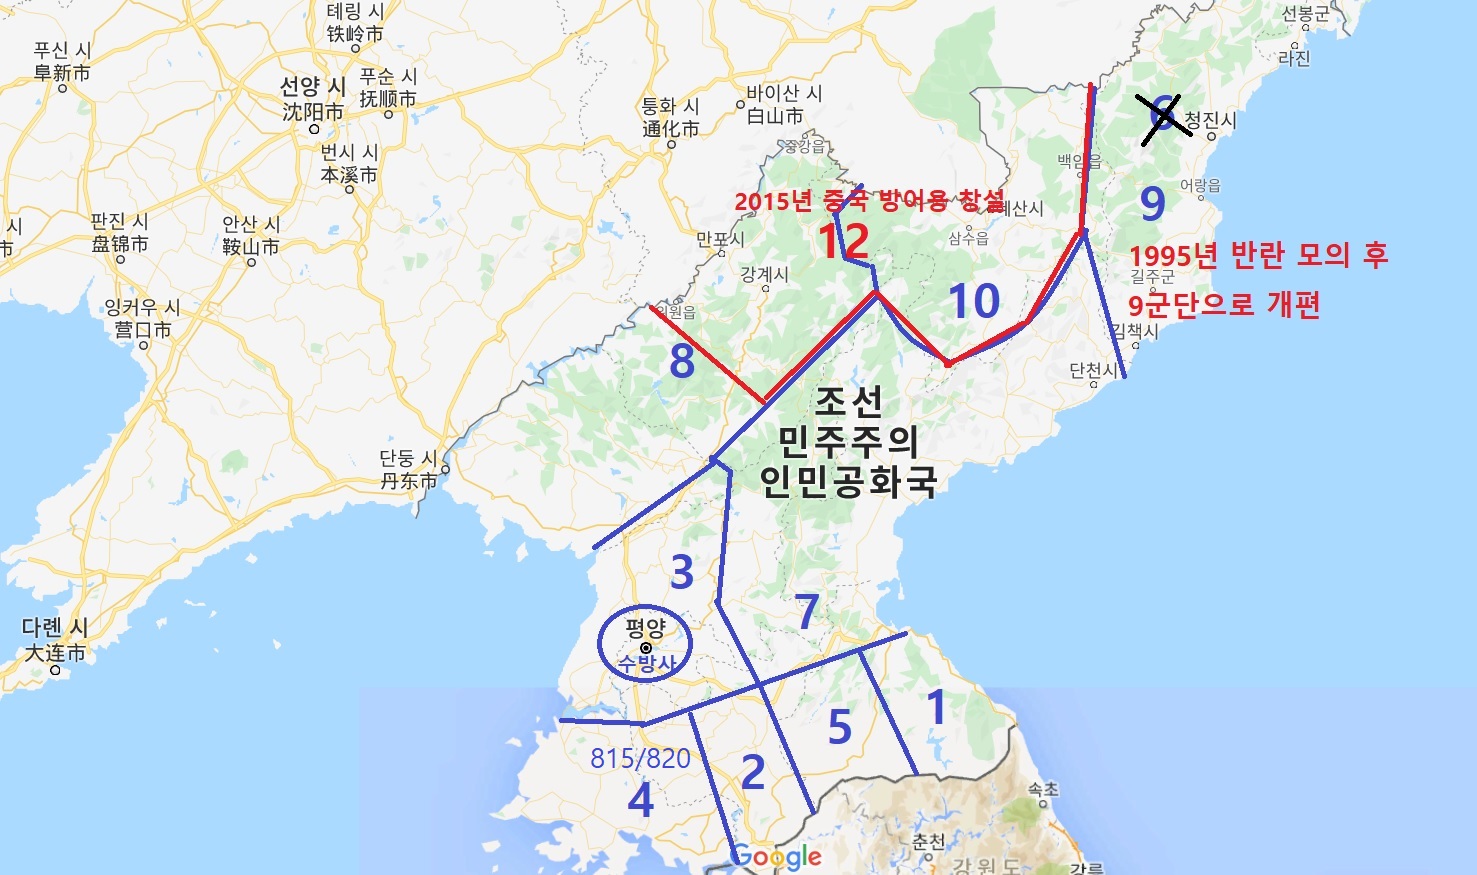 dprk army alignment1